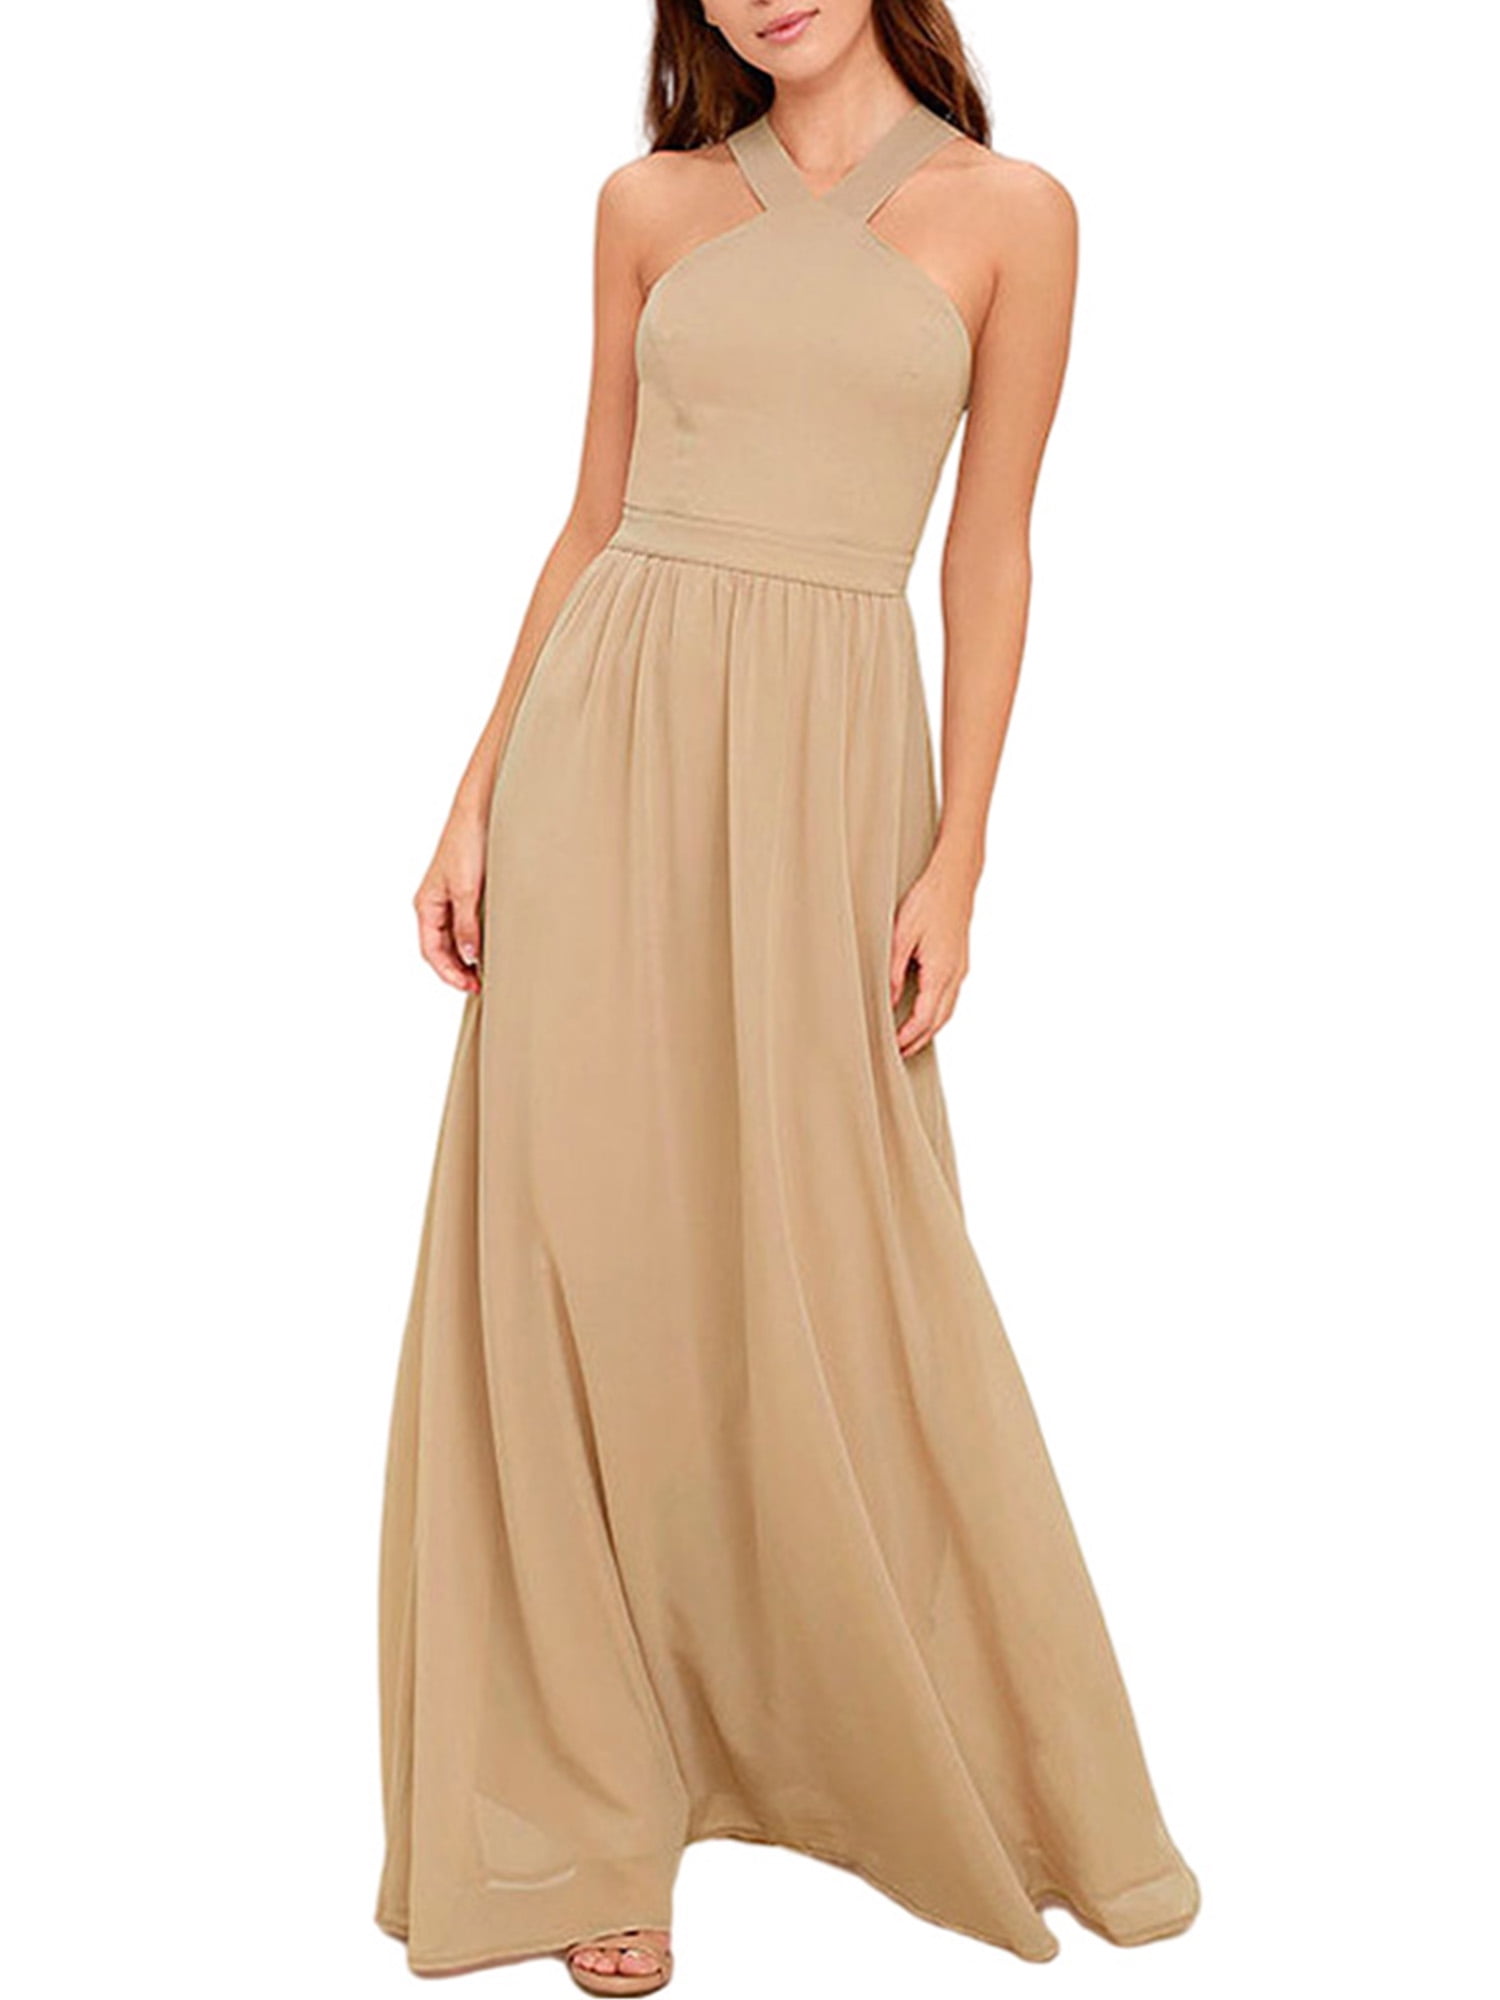 Bridesmaid Dress Halter Chiffon Long Evening Prom Party Gown 